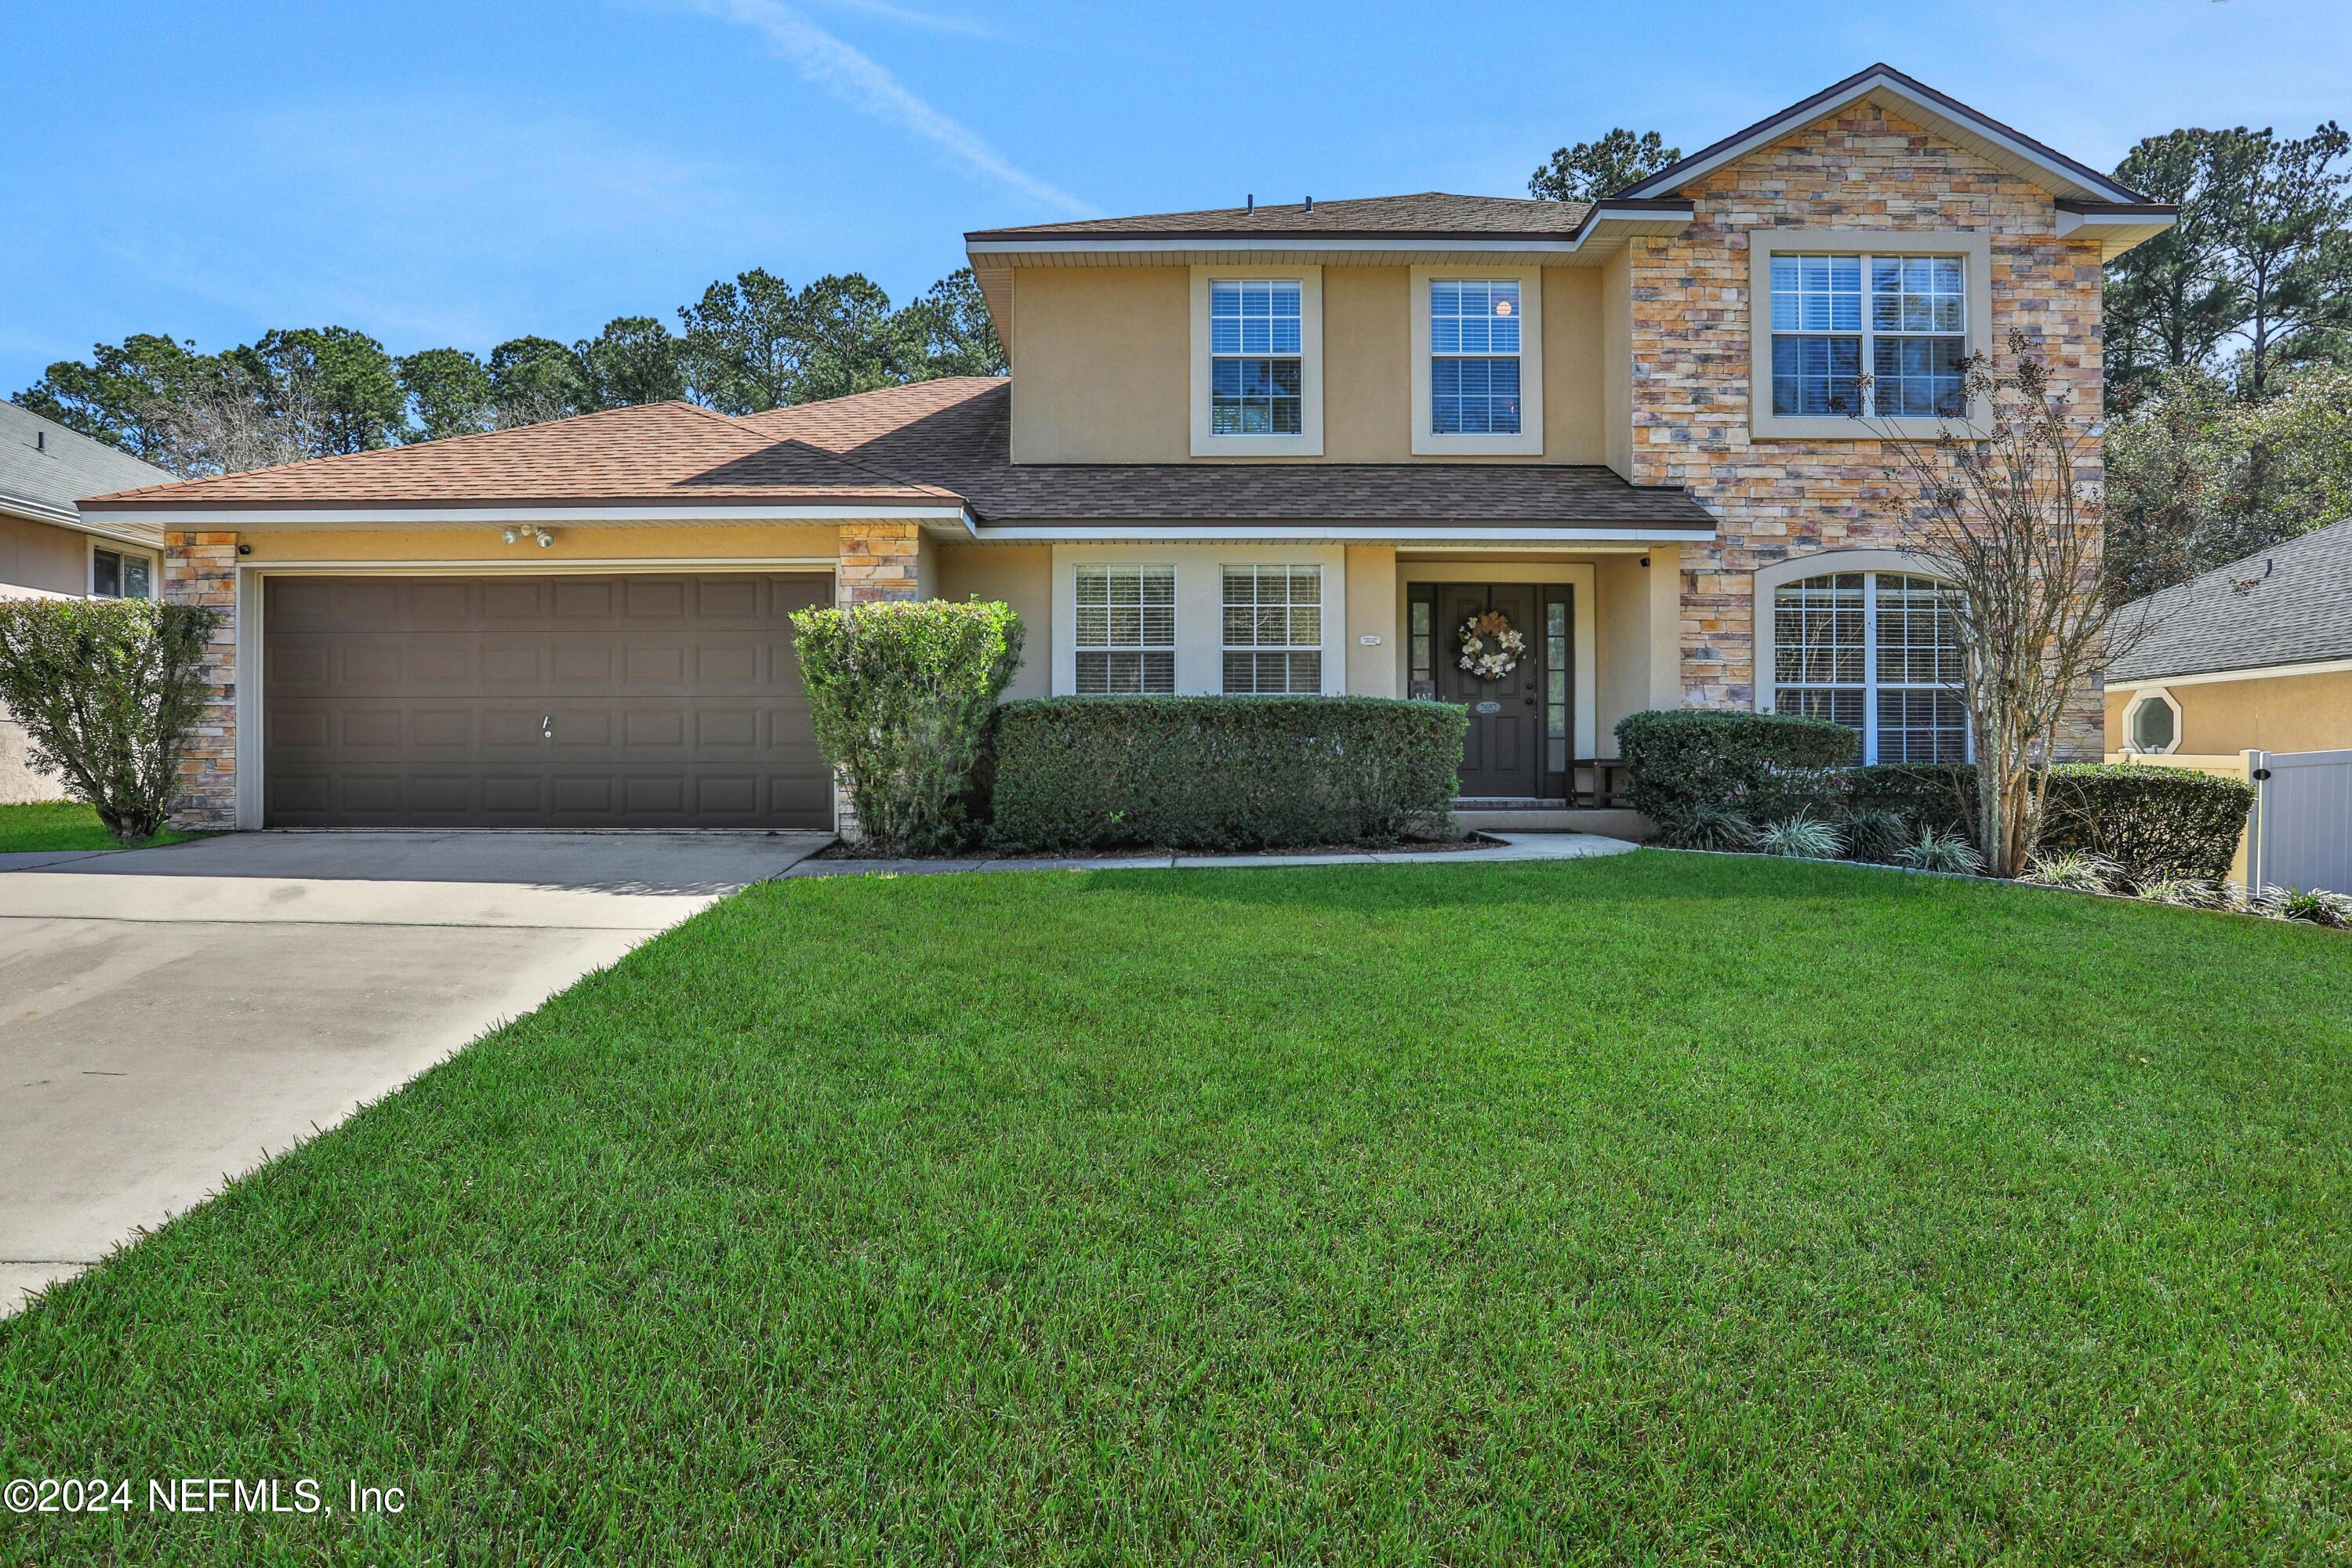 Middleburg, FL home for sale located at 2652 RAVINE HILL Drive, Middleburg, FL 32068